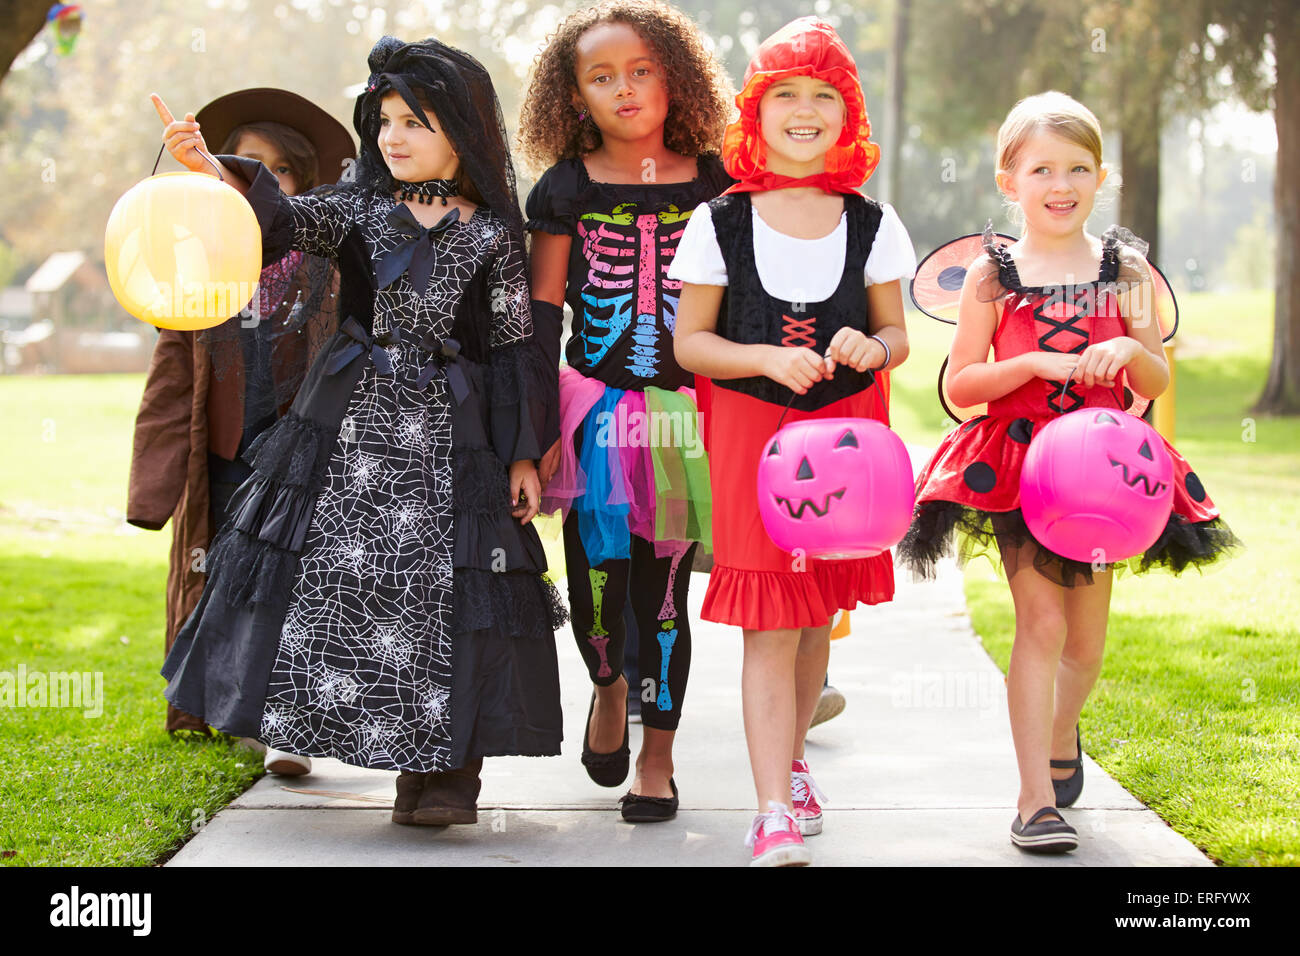 Children In Fancy Costume Dress Going Trick Or Treating Stock Photo